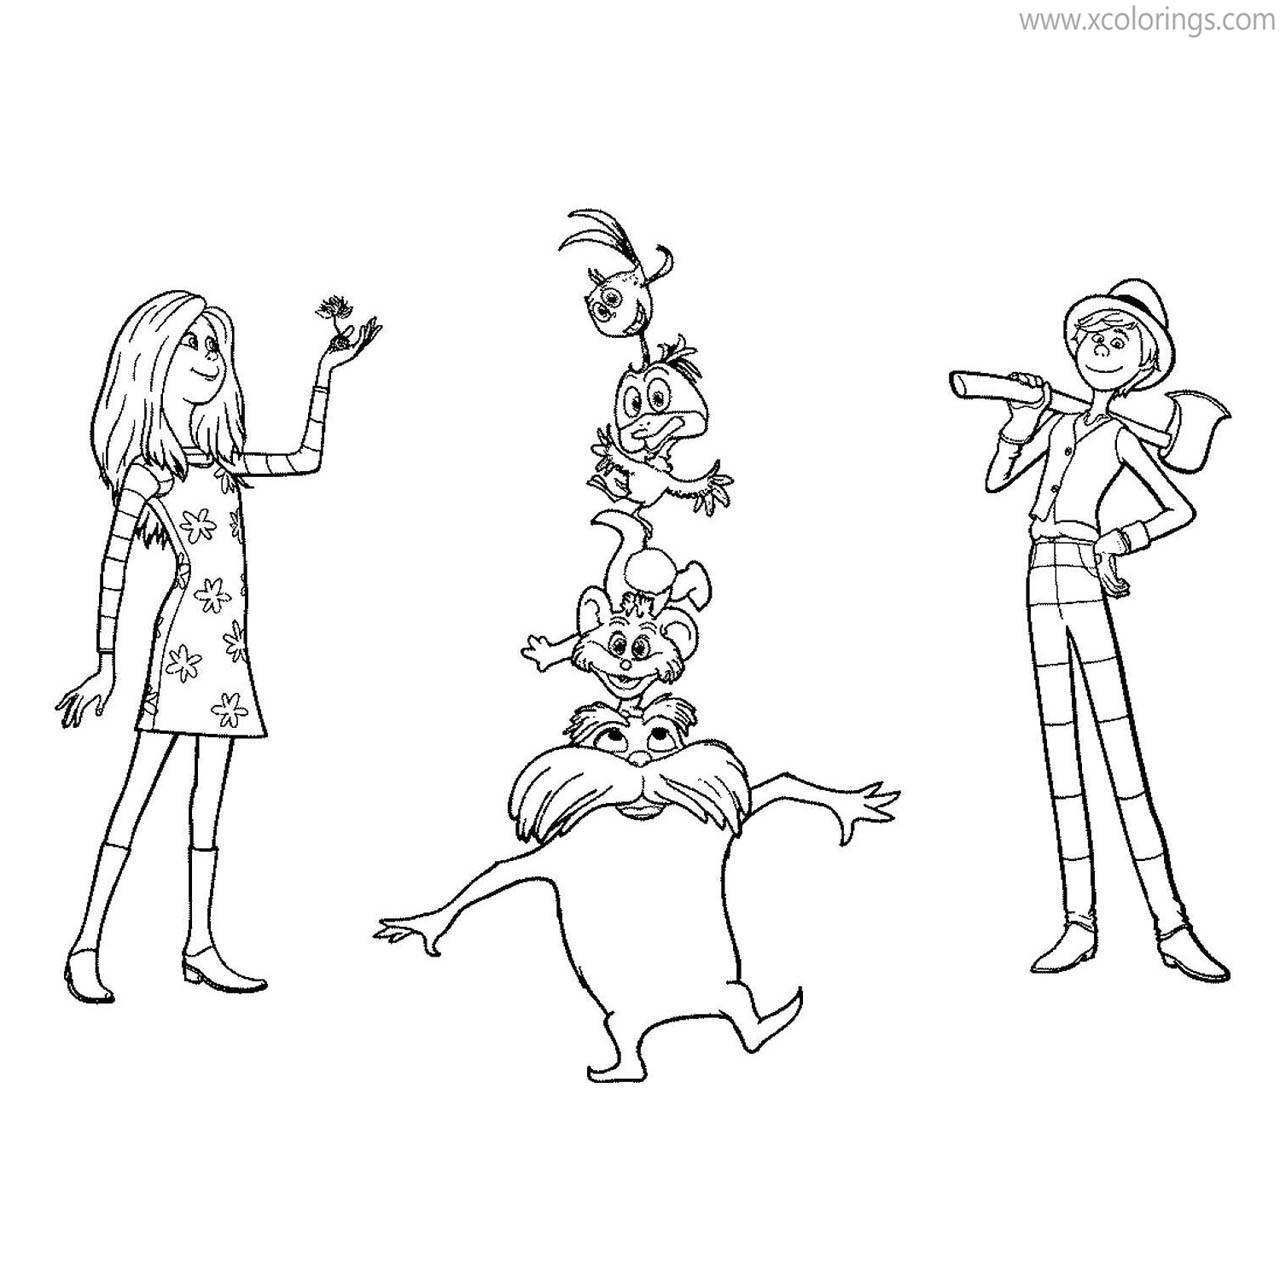 Free Lorax Characters Coloring Pages Audrey Once ler and Animals printable